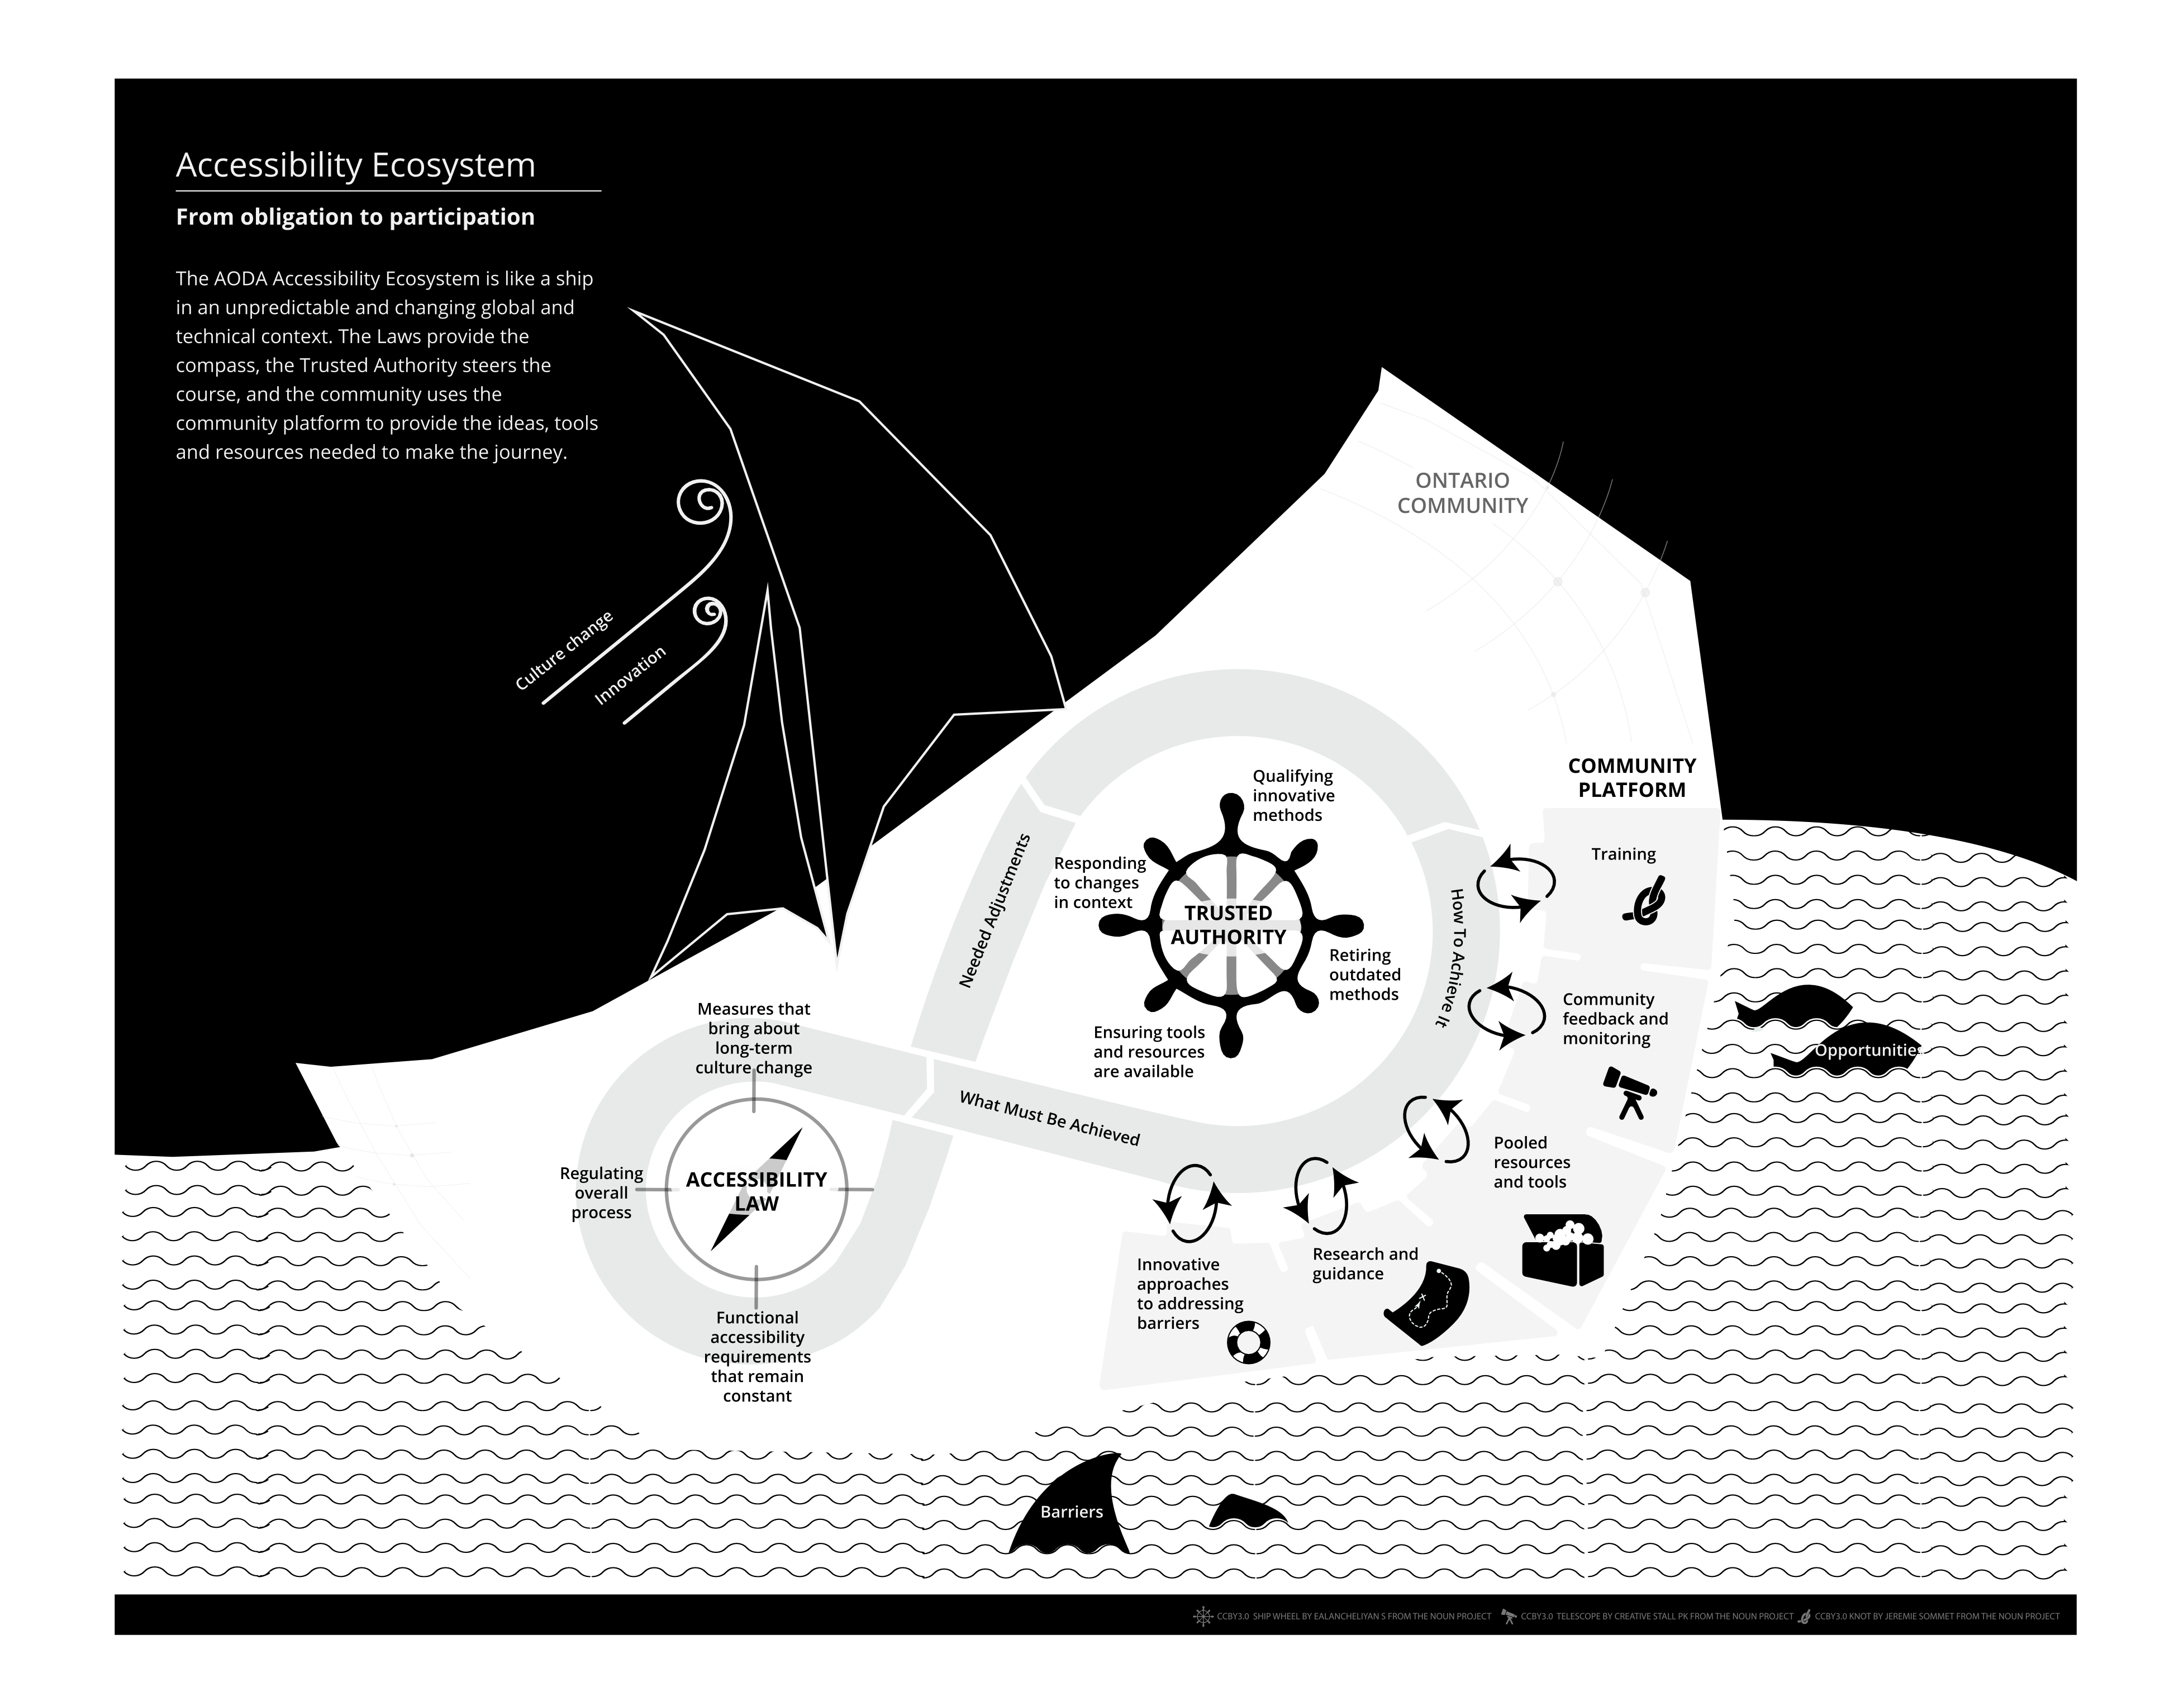 A diagram representing the Accessibility Ecosystem using the visual analogy of a sailing ship in the water. From obligation to participation: The AODA Accessibility Ecosystem is like a ship in an unpredictable and changing global and technical context. The Laws provide the compass, the Trusted Authority steers the course, and the community uses the Community Platform to provide the ideas, tools and resources needed to make the journey.